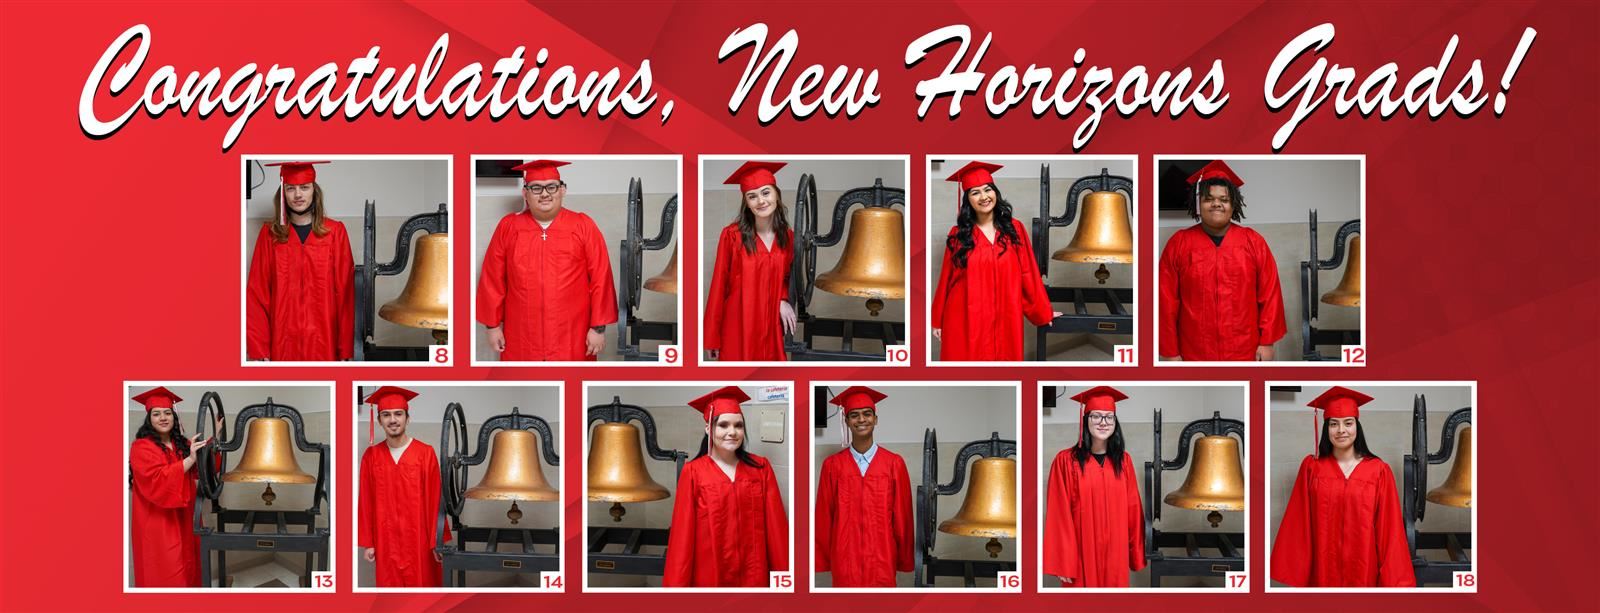 It was a day full of graduations at New Horizons High School!